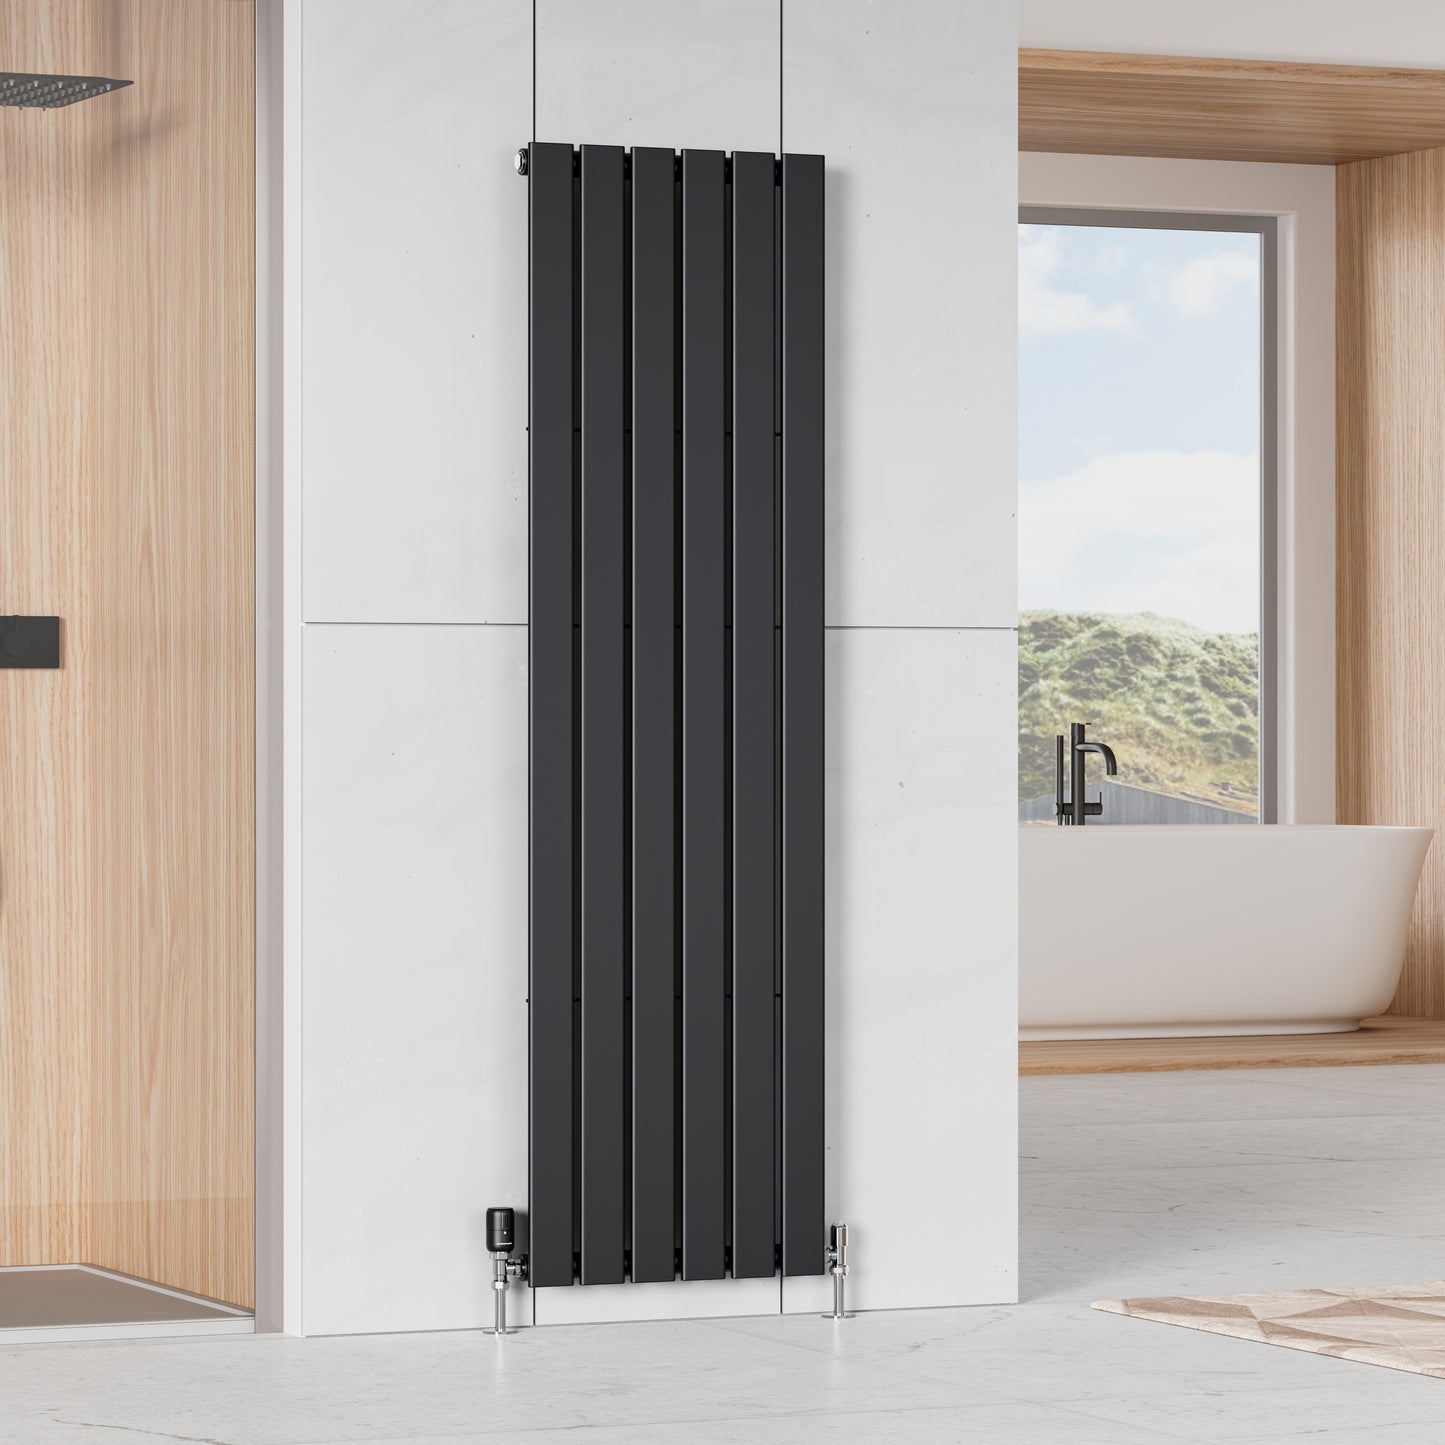 Consol Vertical Single Radiator - Various Sizes - Anthracite